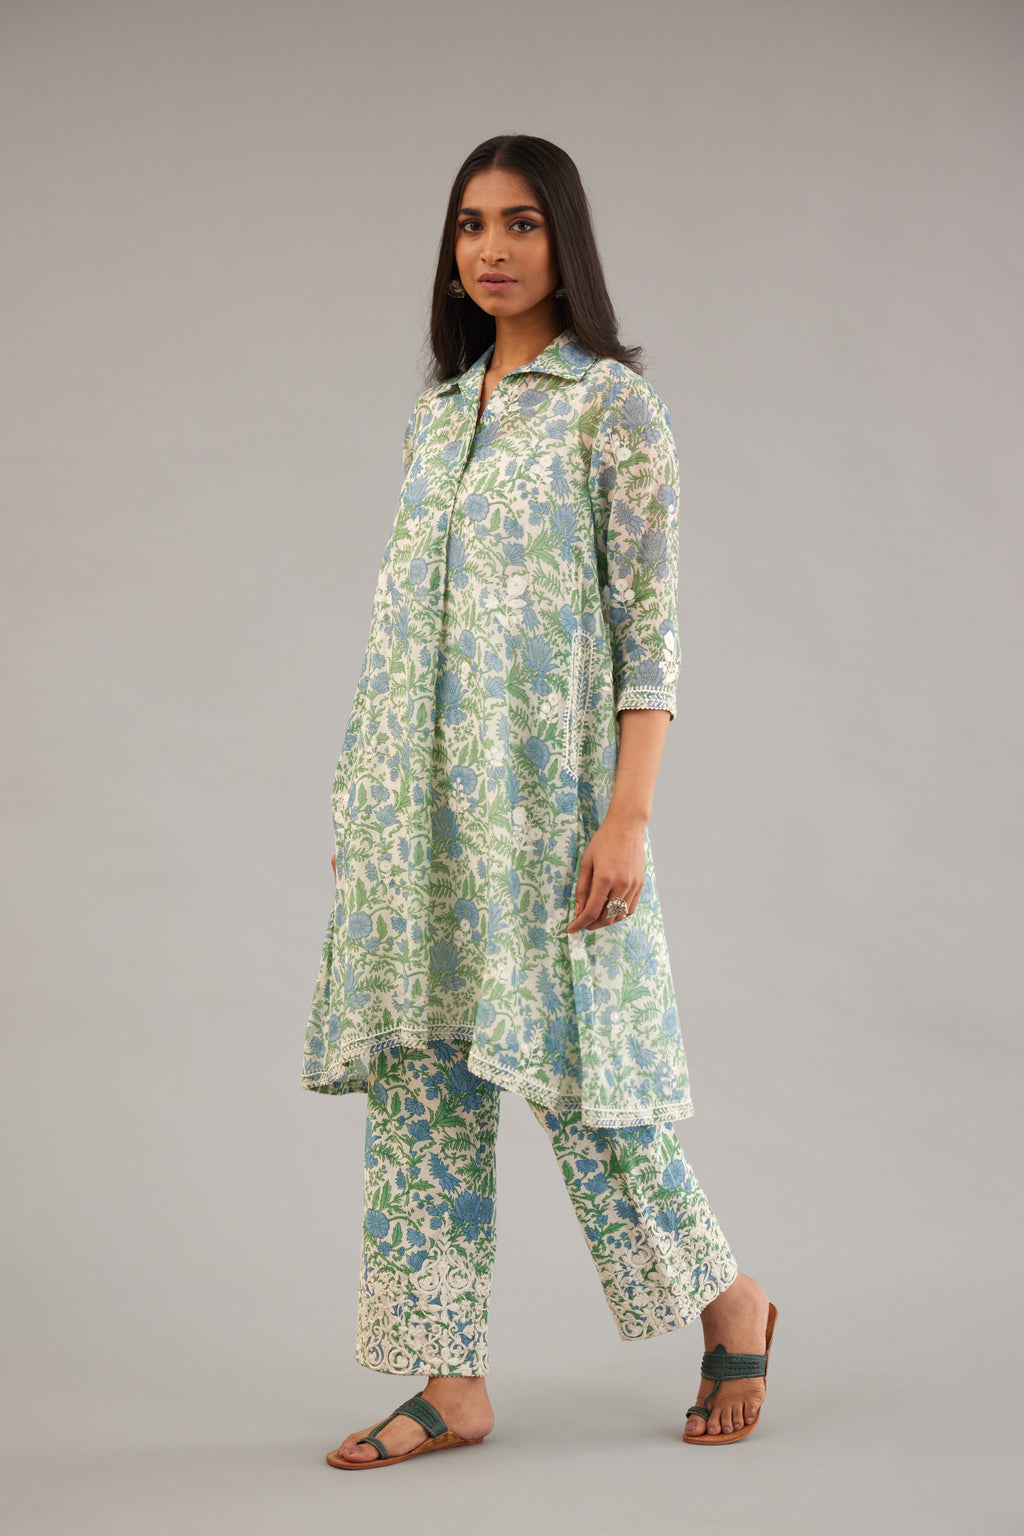 Blue & green hand block printed short kurta, paired with blue & green hand block printed cotton pants with dori embroidery at hem detailed with sequins work